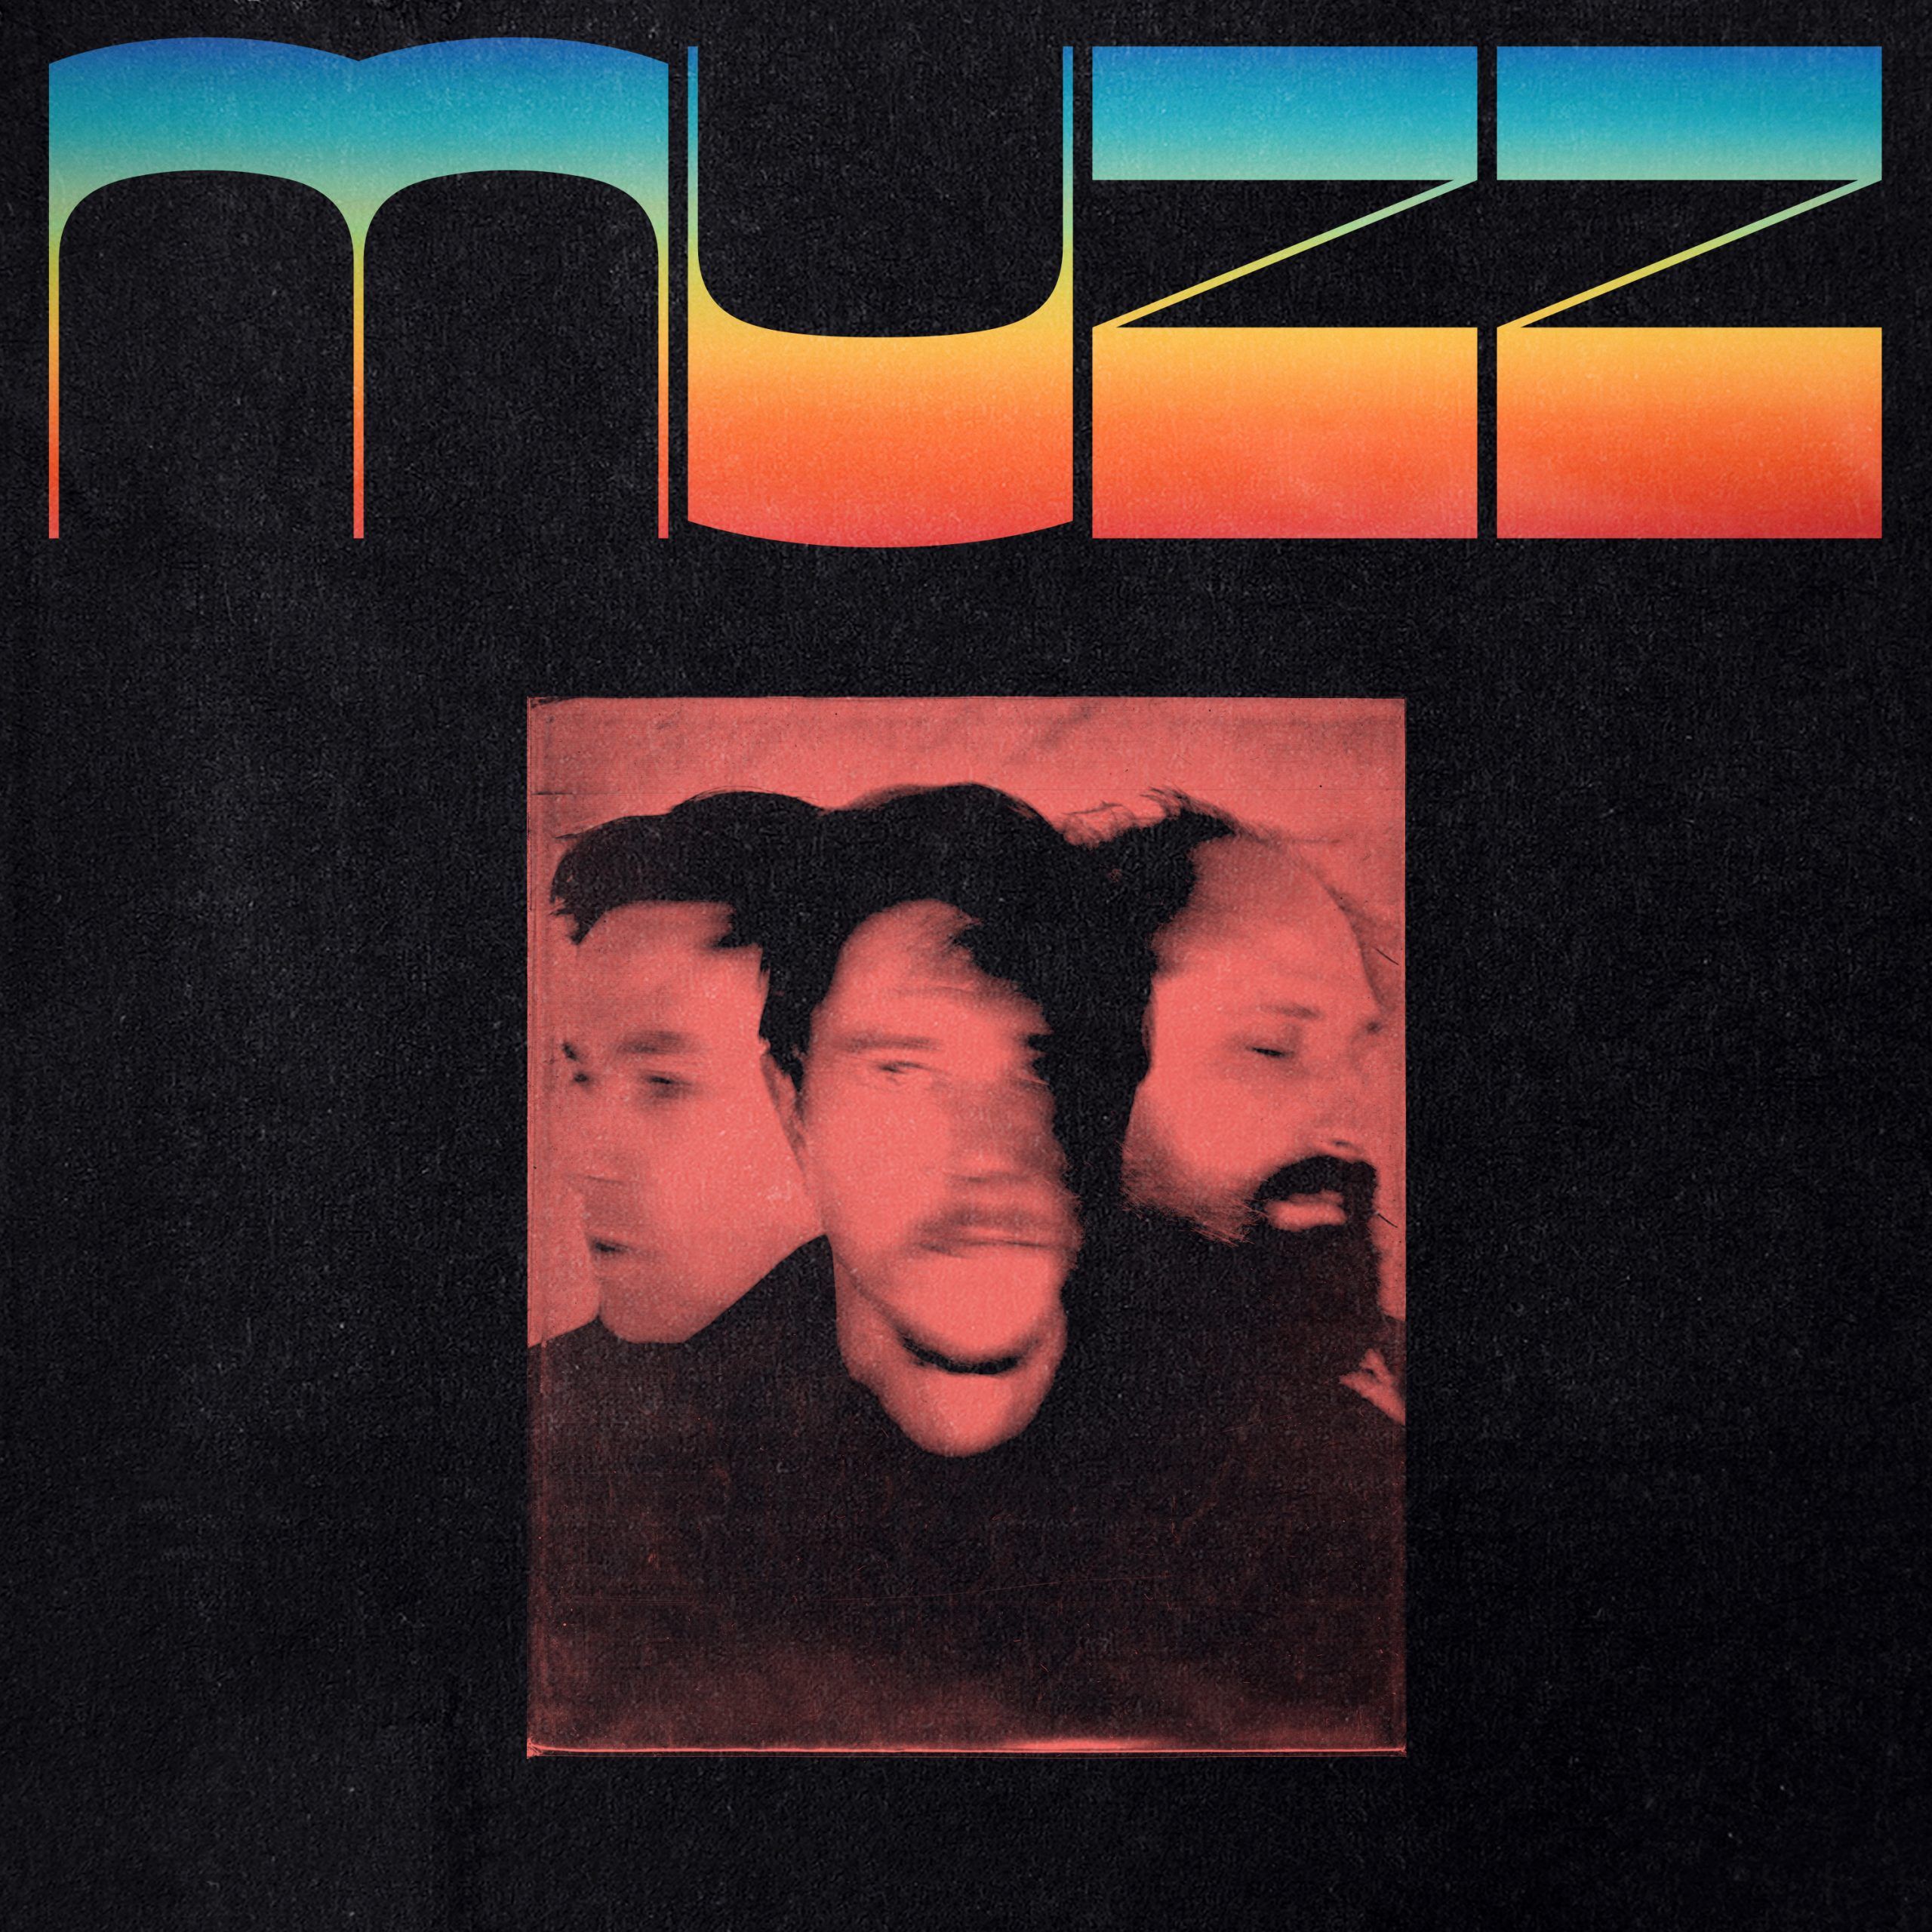 Muzz Sticks the Landing In Its Self-Titled Supergroup First Effort